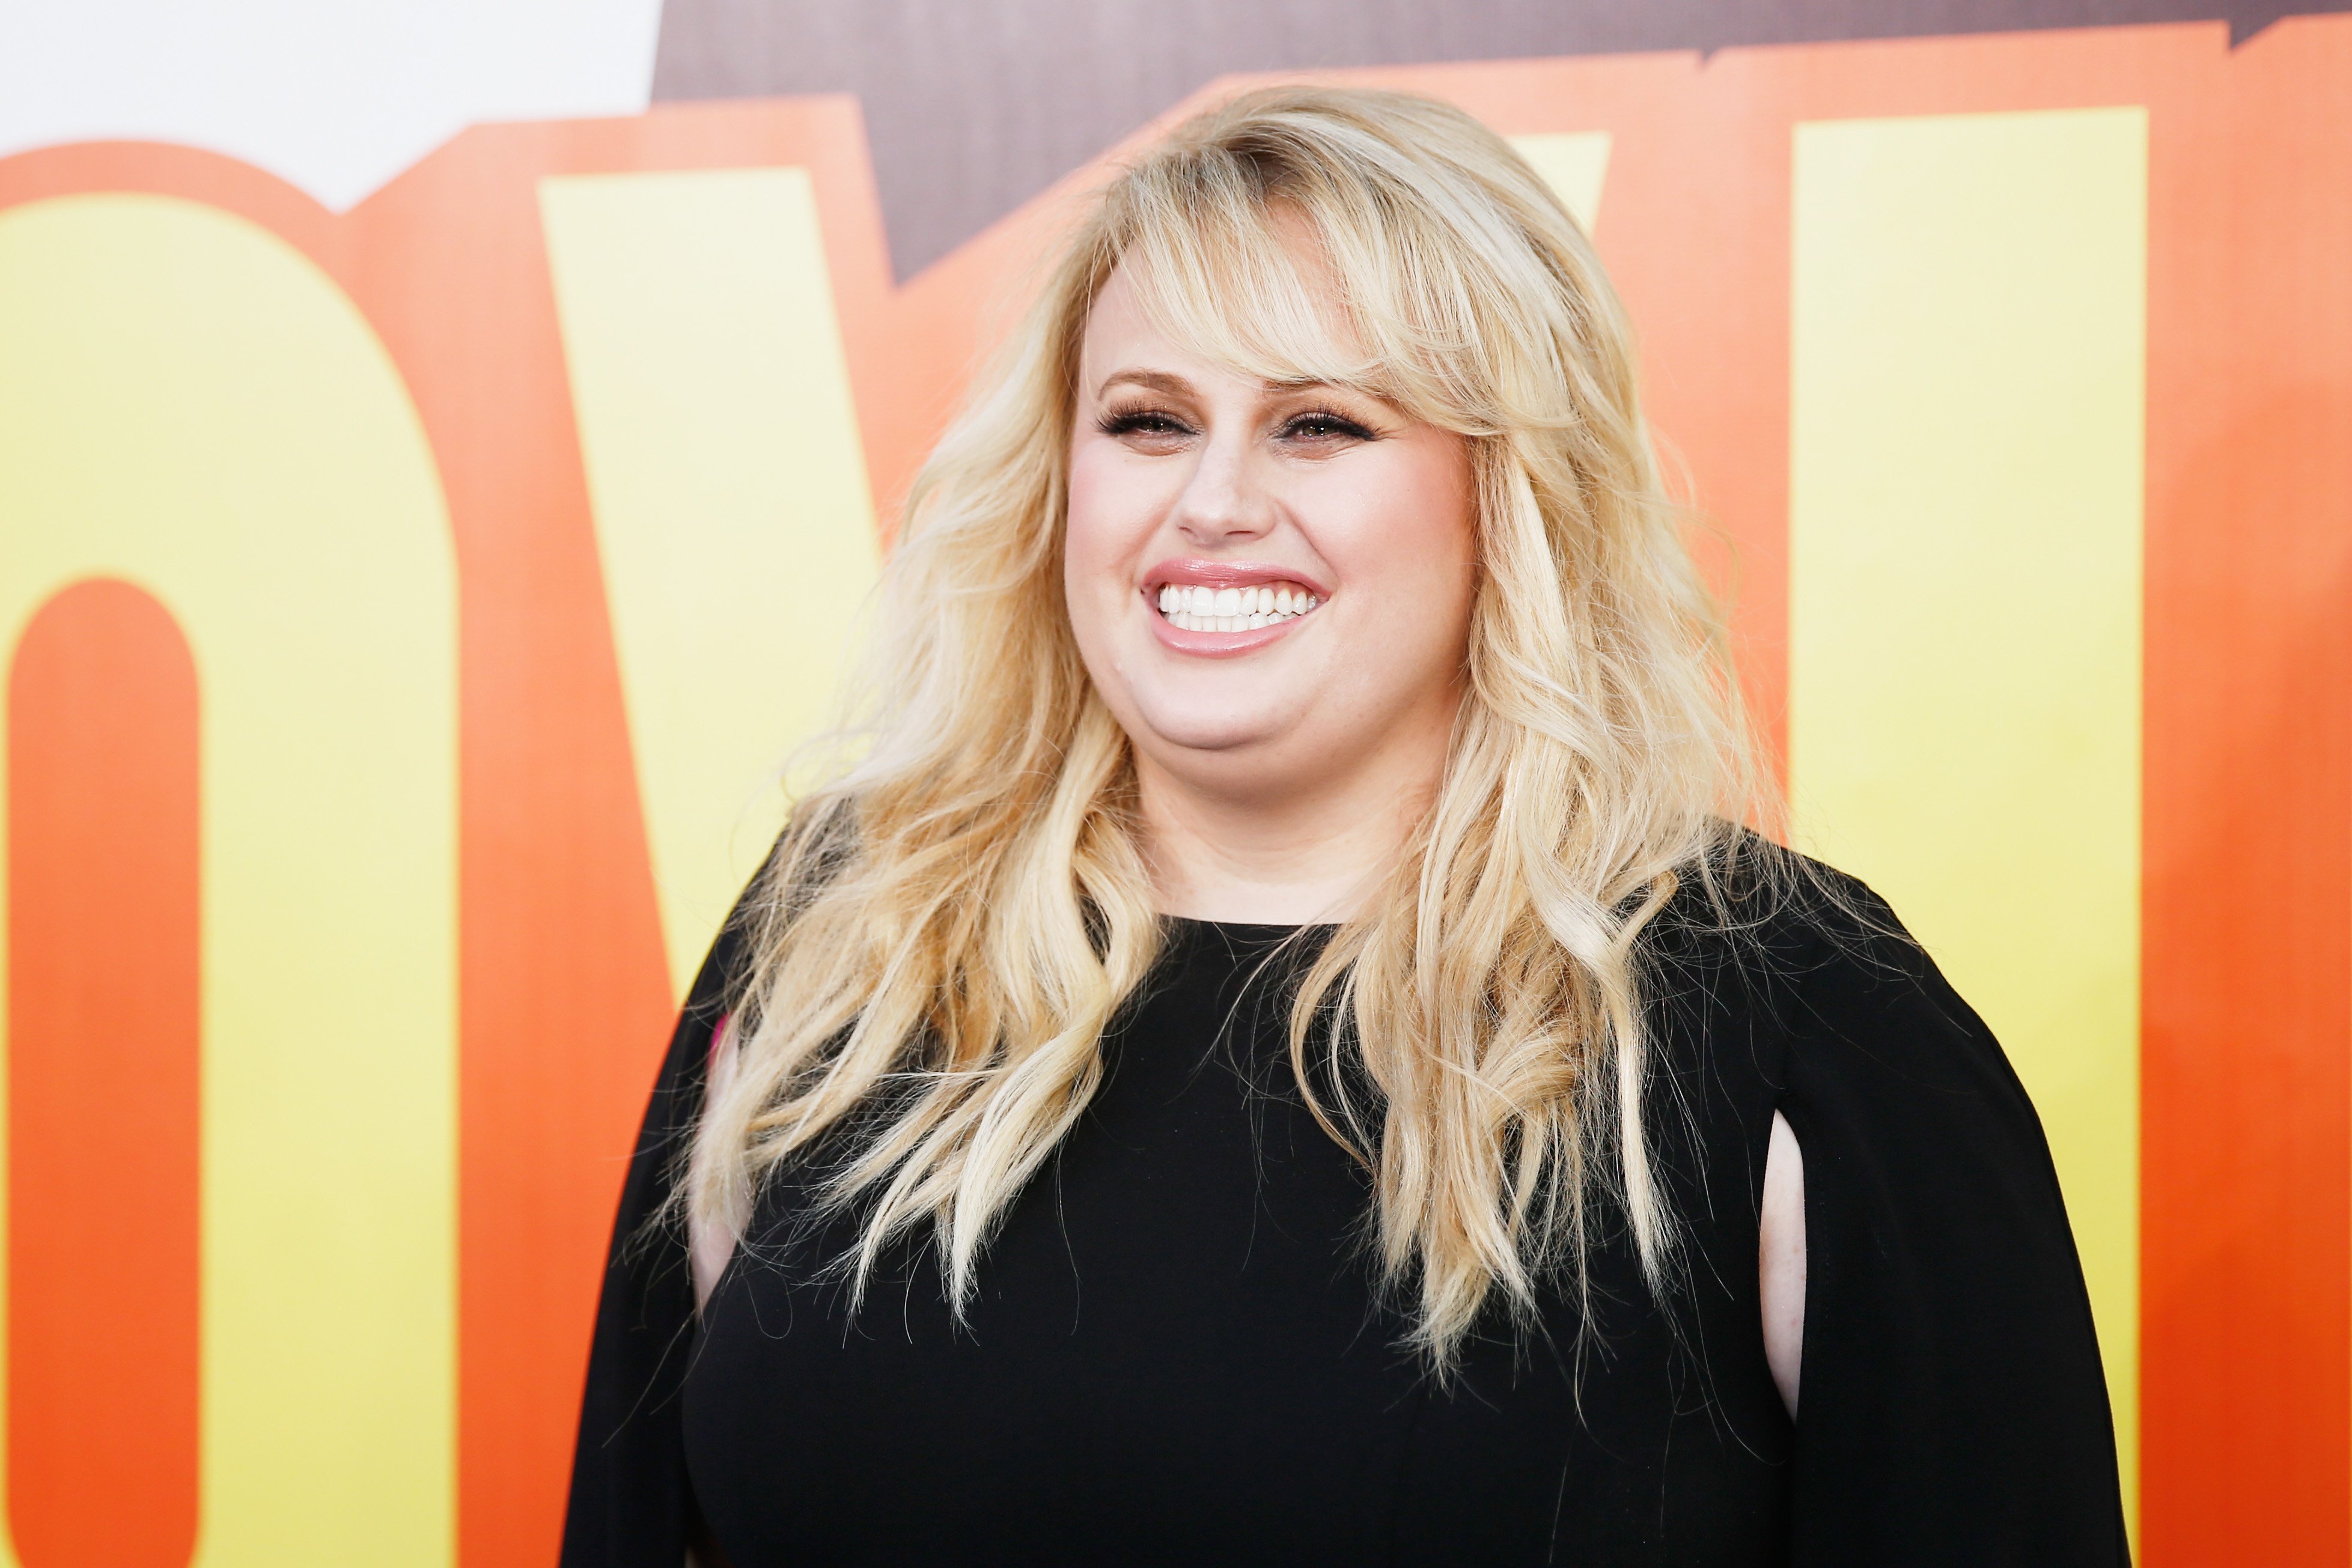 Rebel Wilson attends The 2015 MTV Movie Awards at Nokia Theatre L.A. Live on April 12, 2015.| Photo: Getty Images